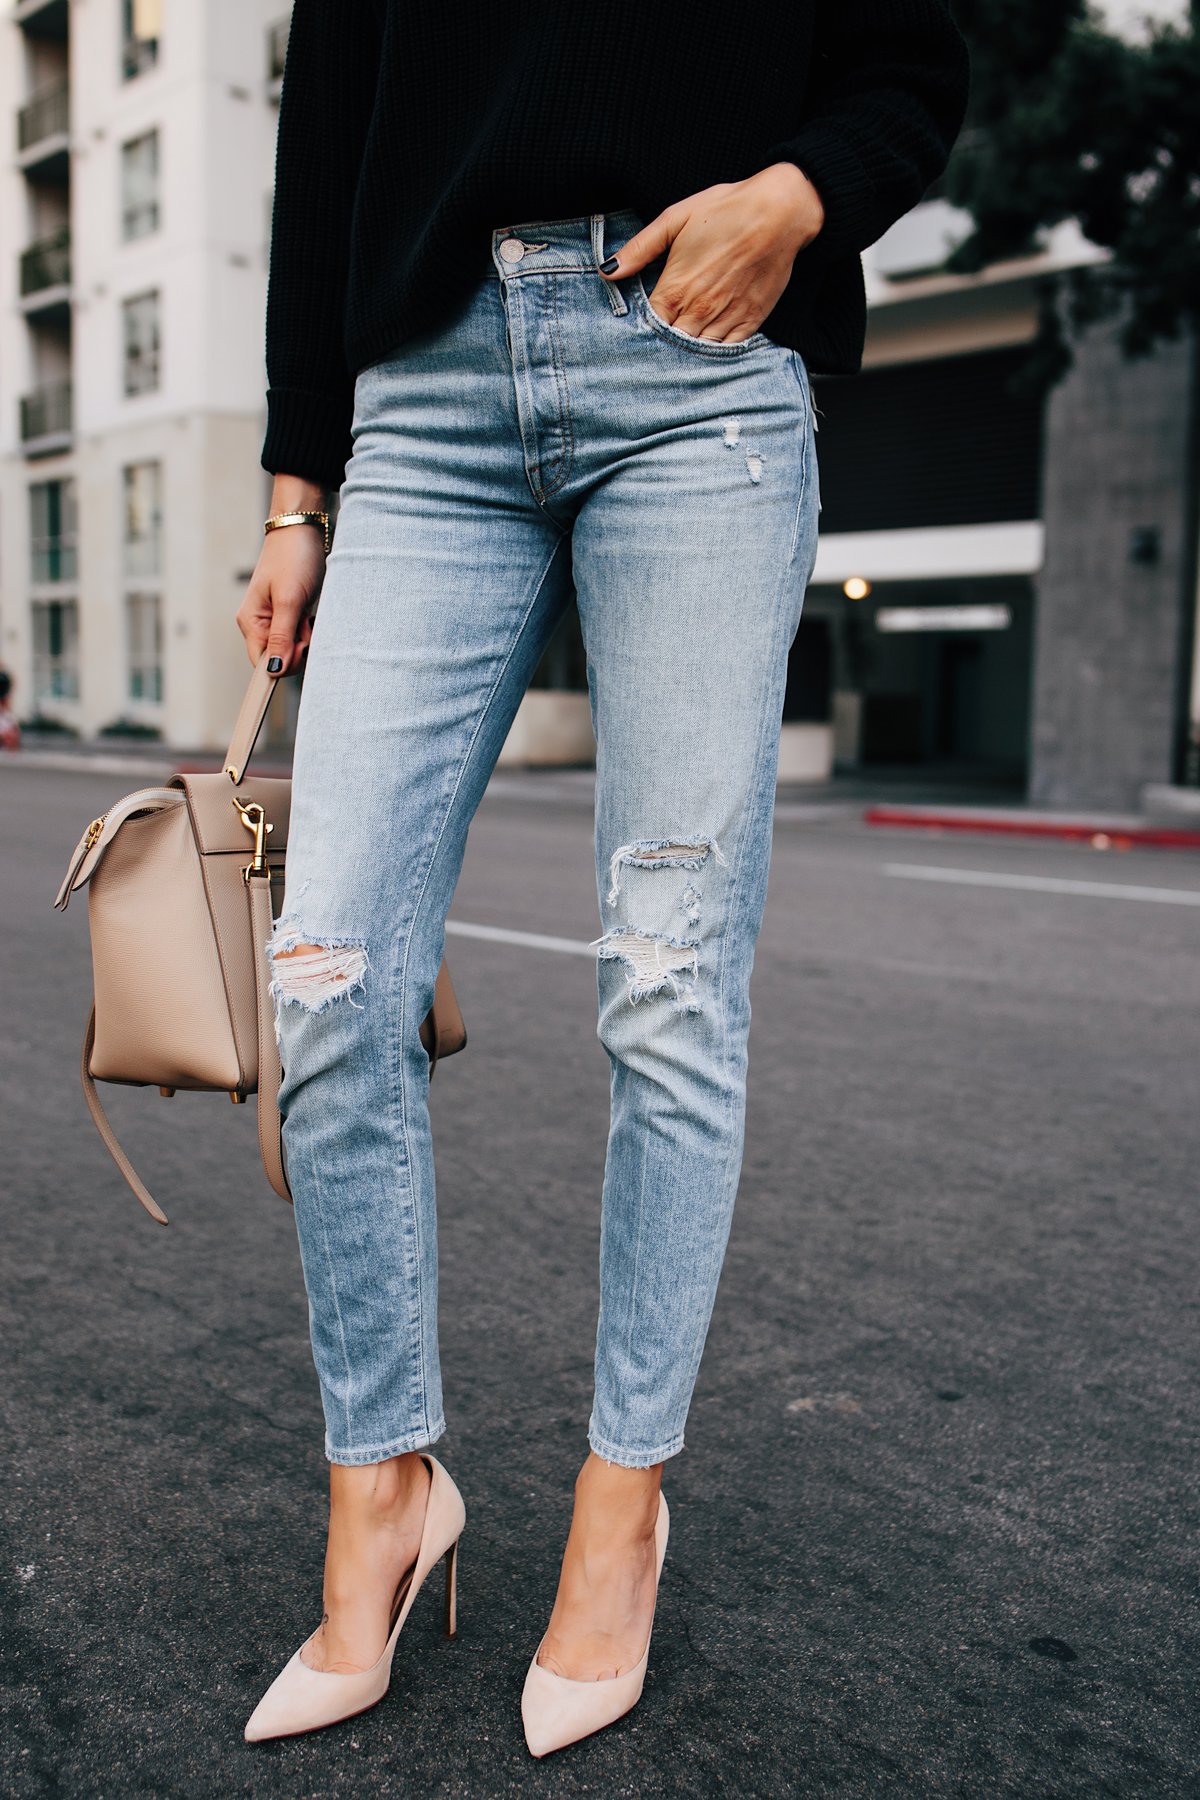 Mother Denim Ripped Jeans Black Sweater Nude Pumps Fashion Jackson San Diego Fashion Blogger Street Style